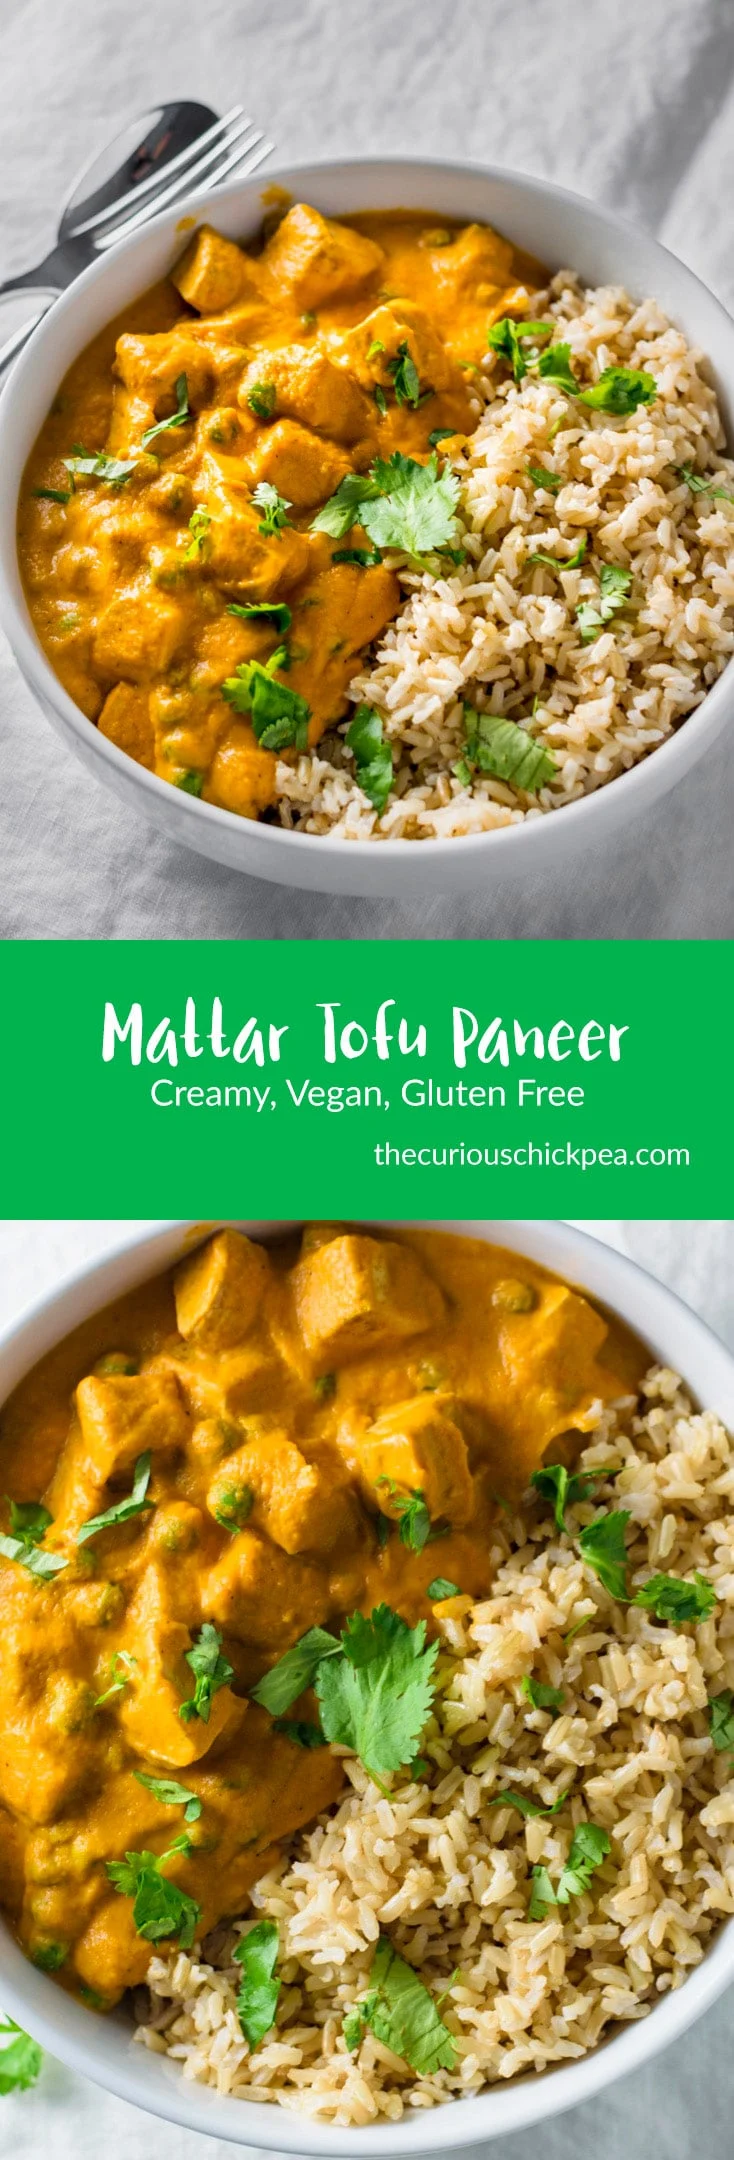 Mattar Tofu Paneer | Vegan and Gluten Free. A garam masala spiced tomato sauce is made creamy with cauliflower and coconut milk and is simmered with tofu and green peas for a delicious, medium spicy, Indian dish reminiscent of mattar paneer. | thecuriouschickpea.com #vegan #glutenfree